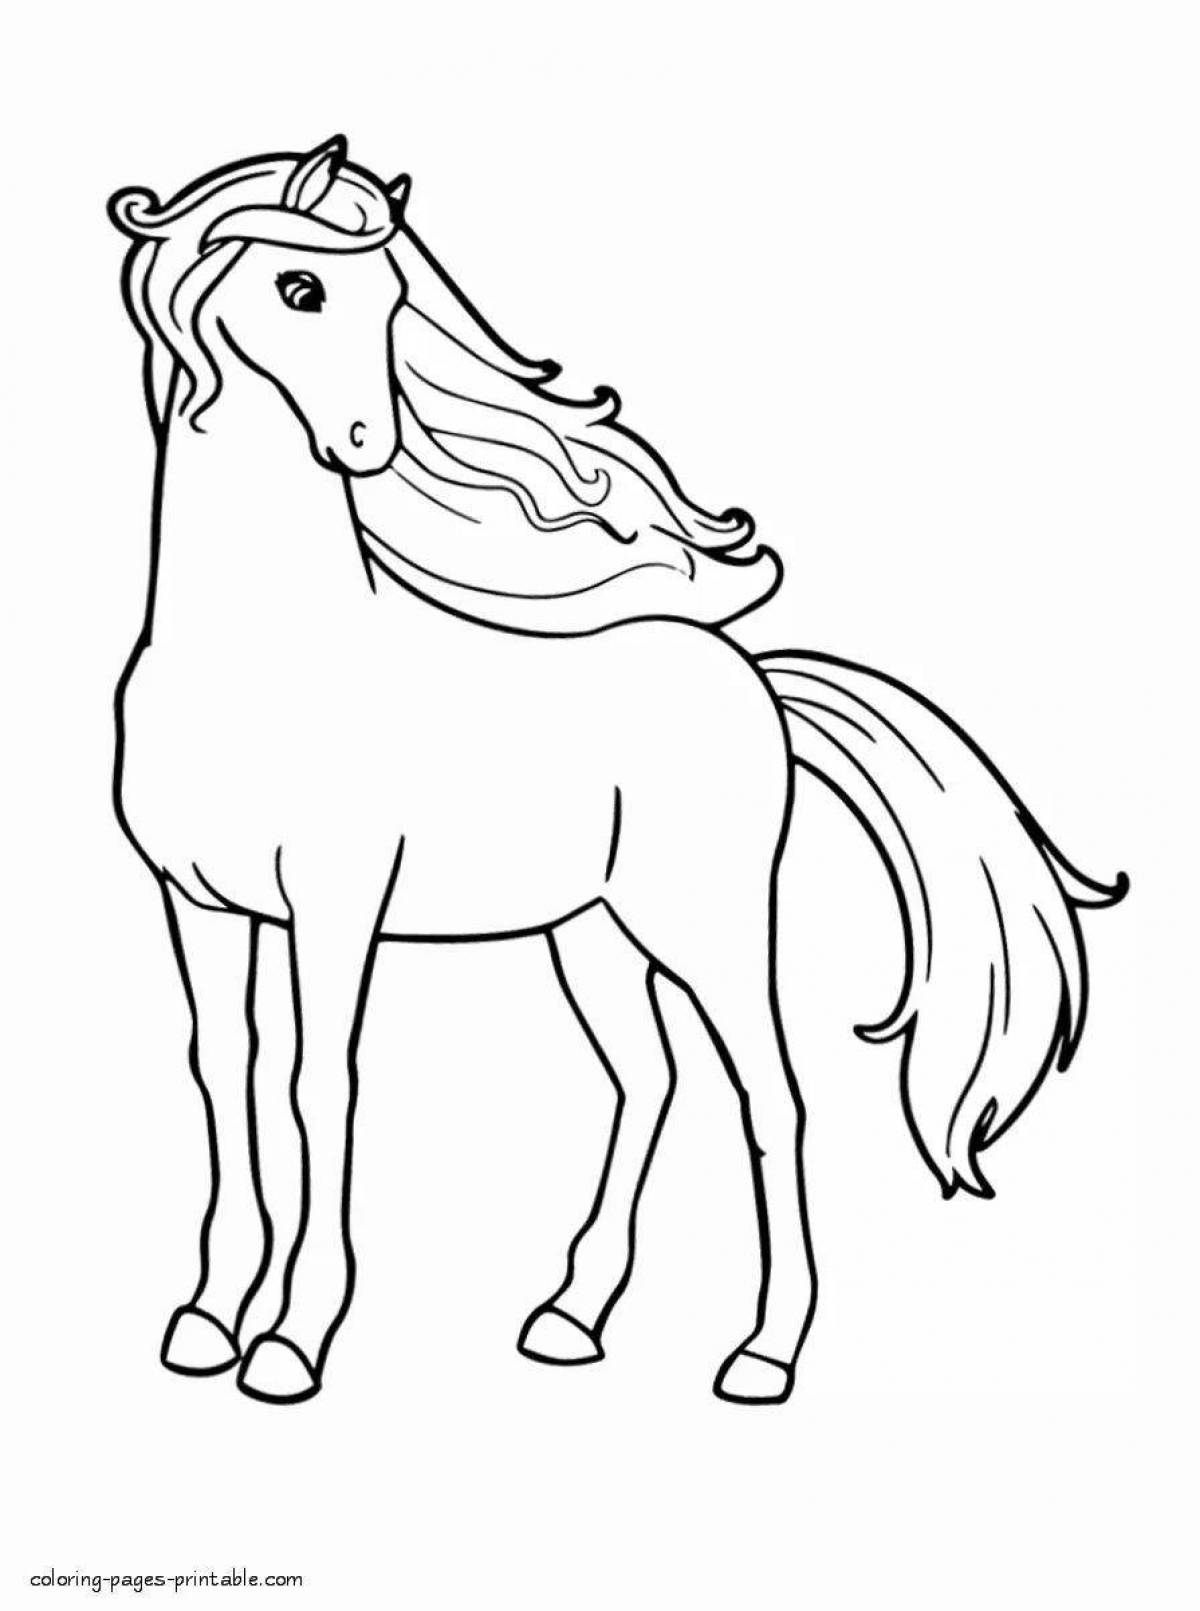 Cute barbie on horse coloring page